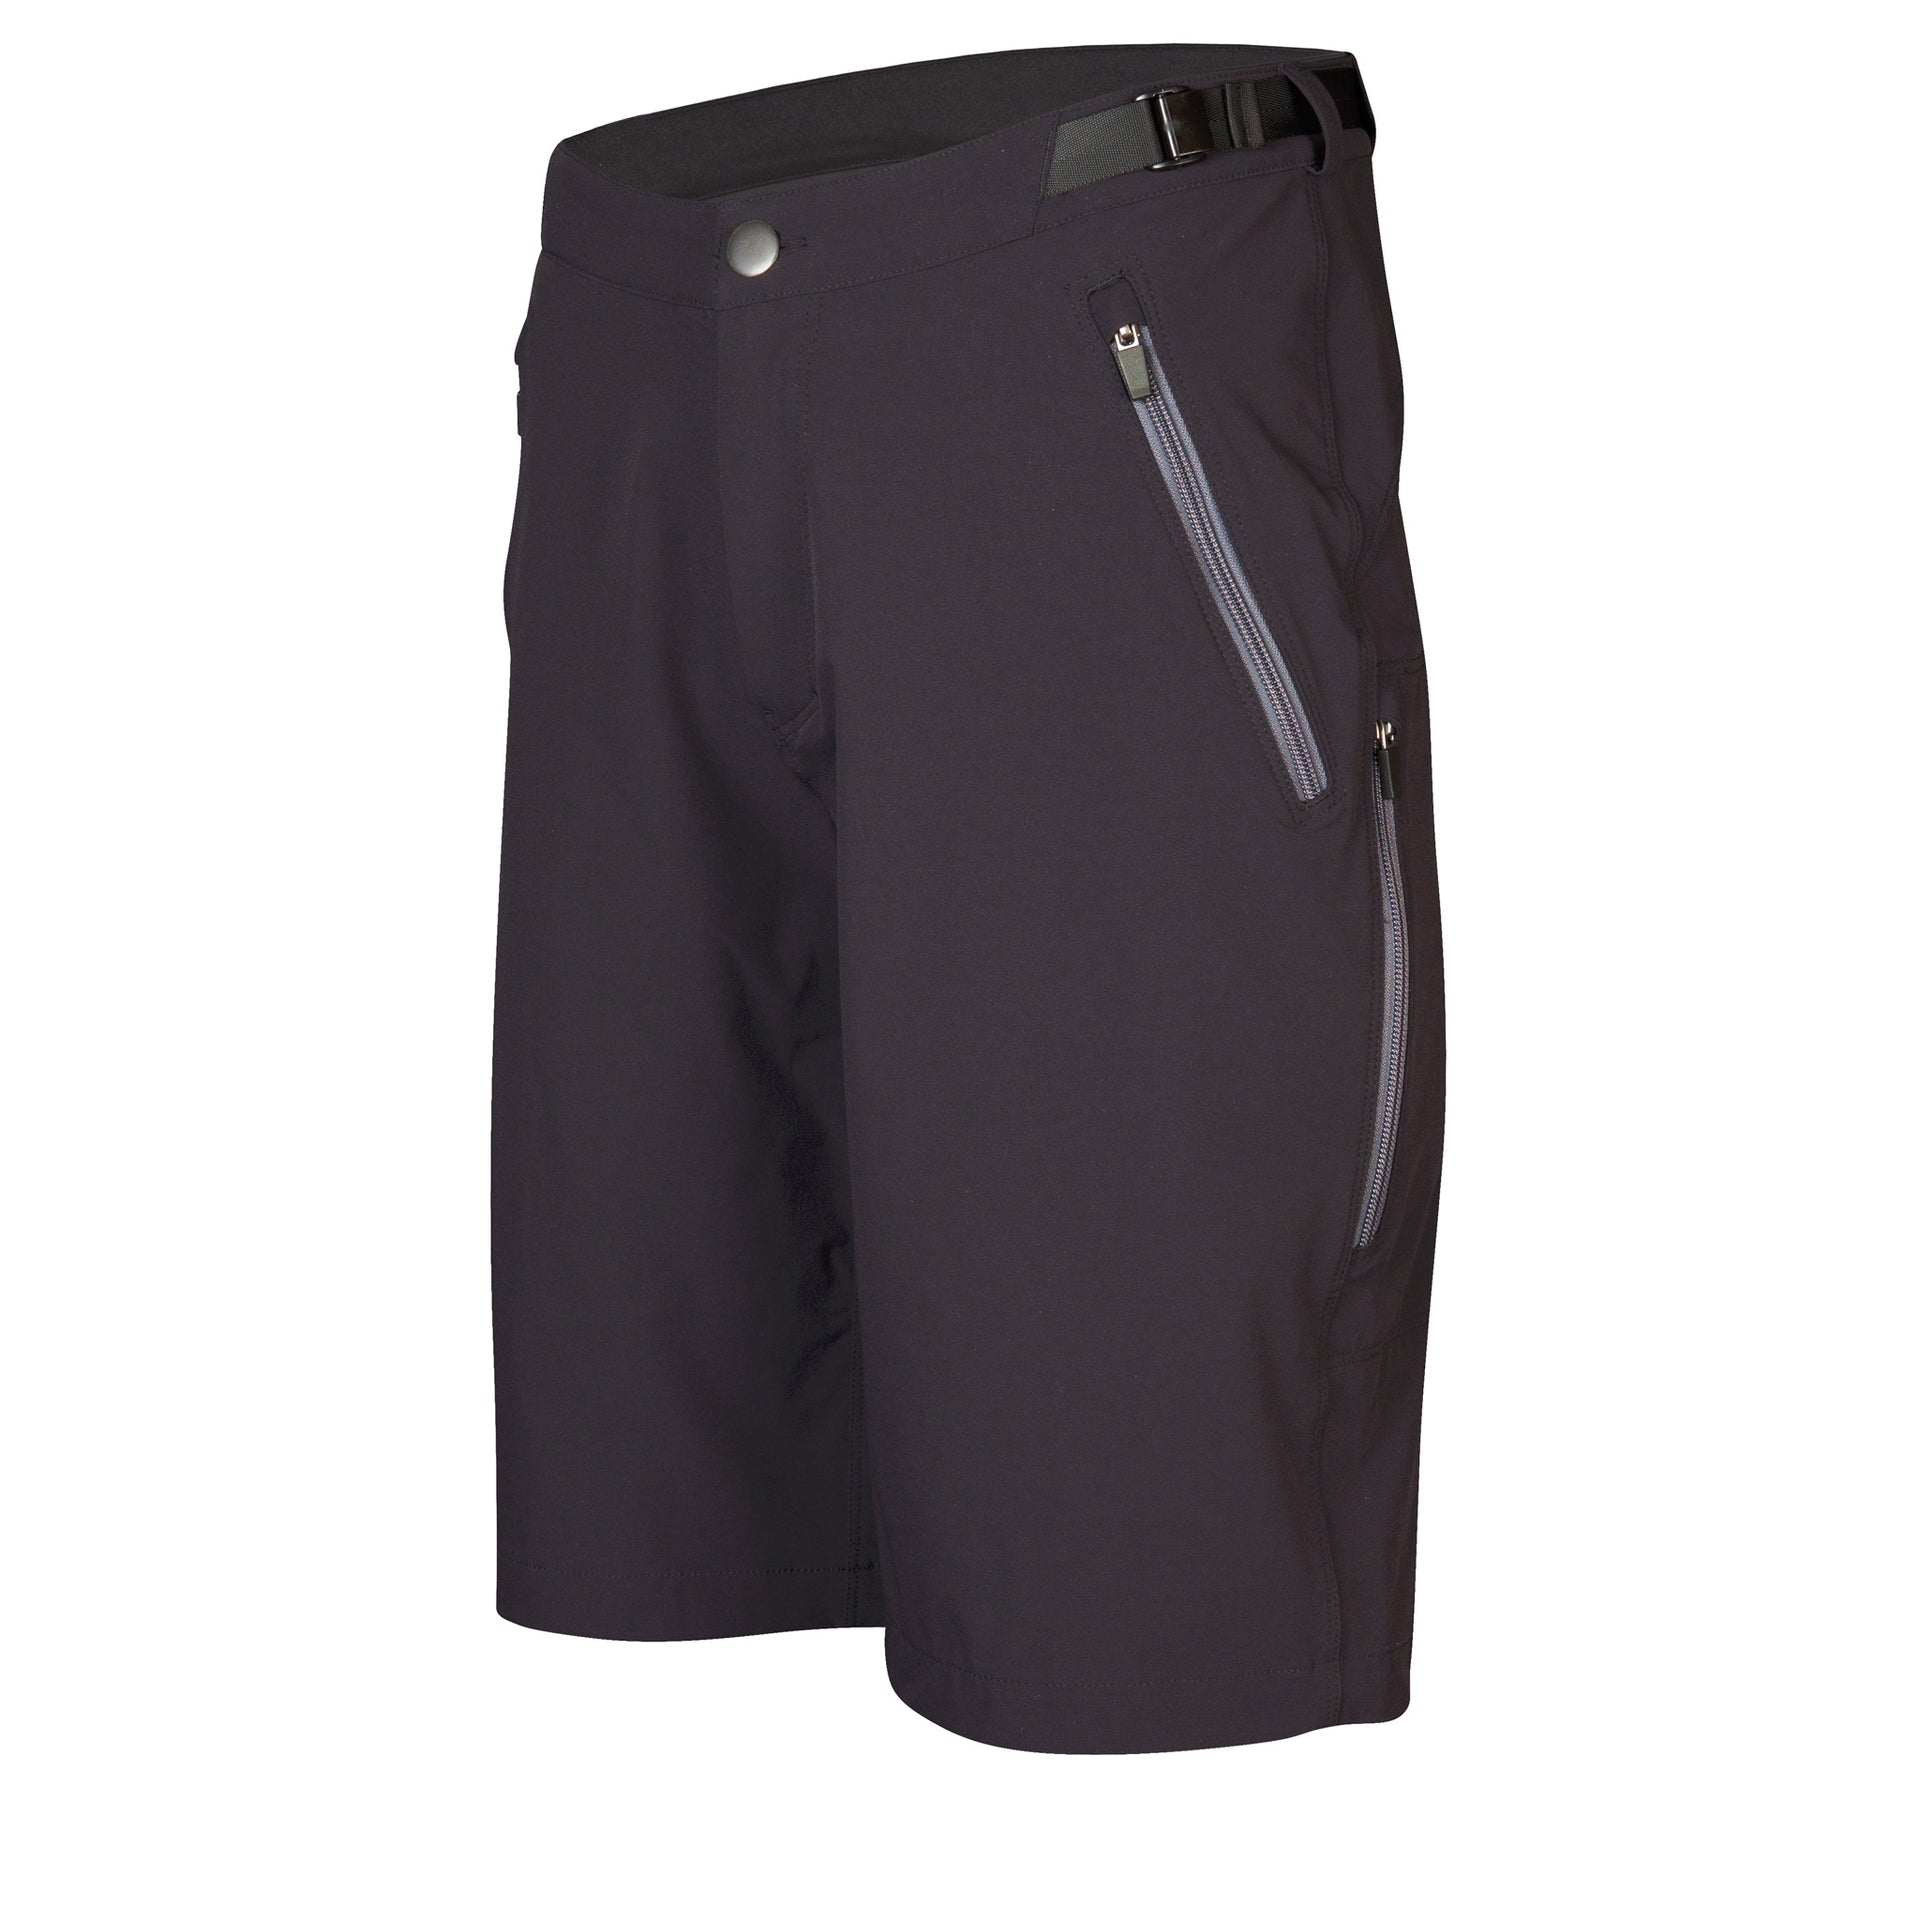 Athletic Fit and Regular Fit Enduro Mountain Bike Shorts